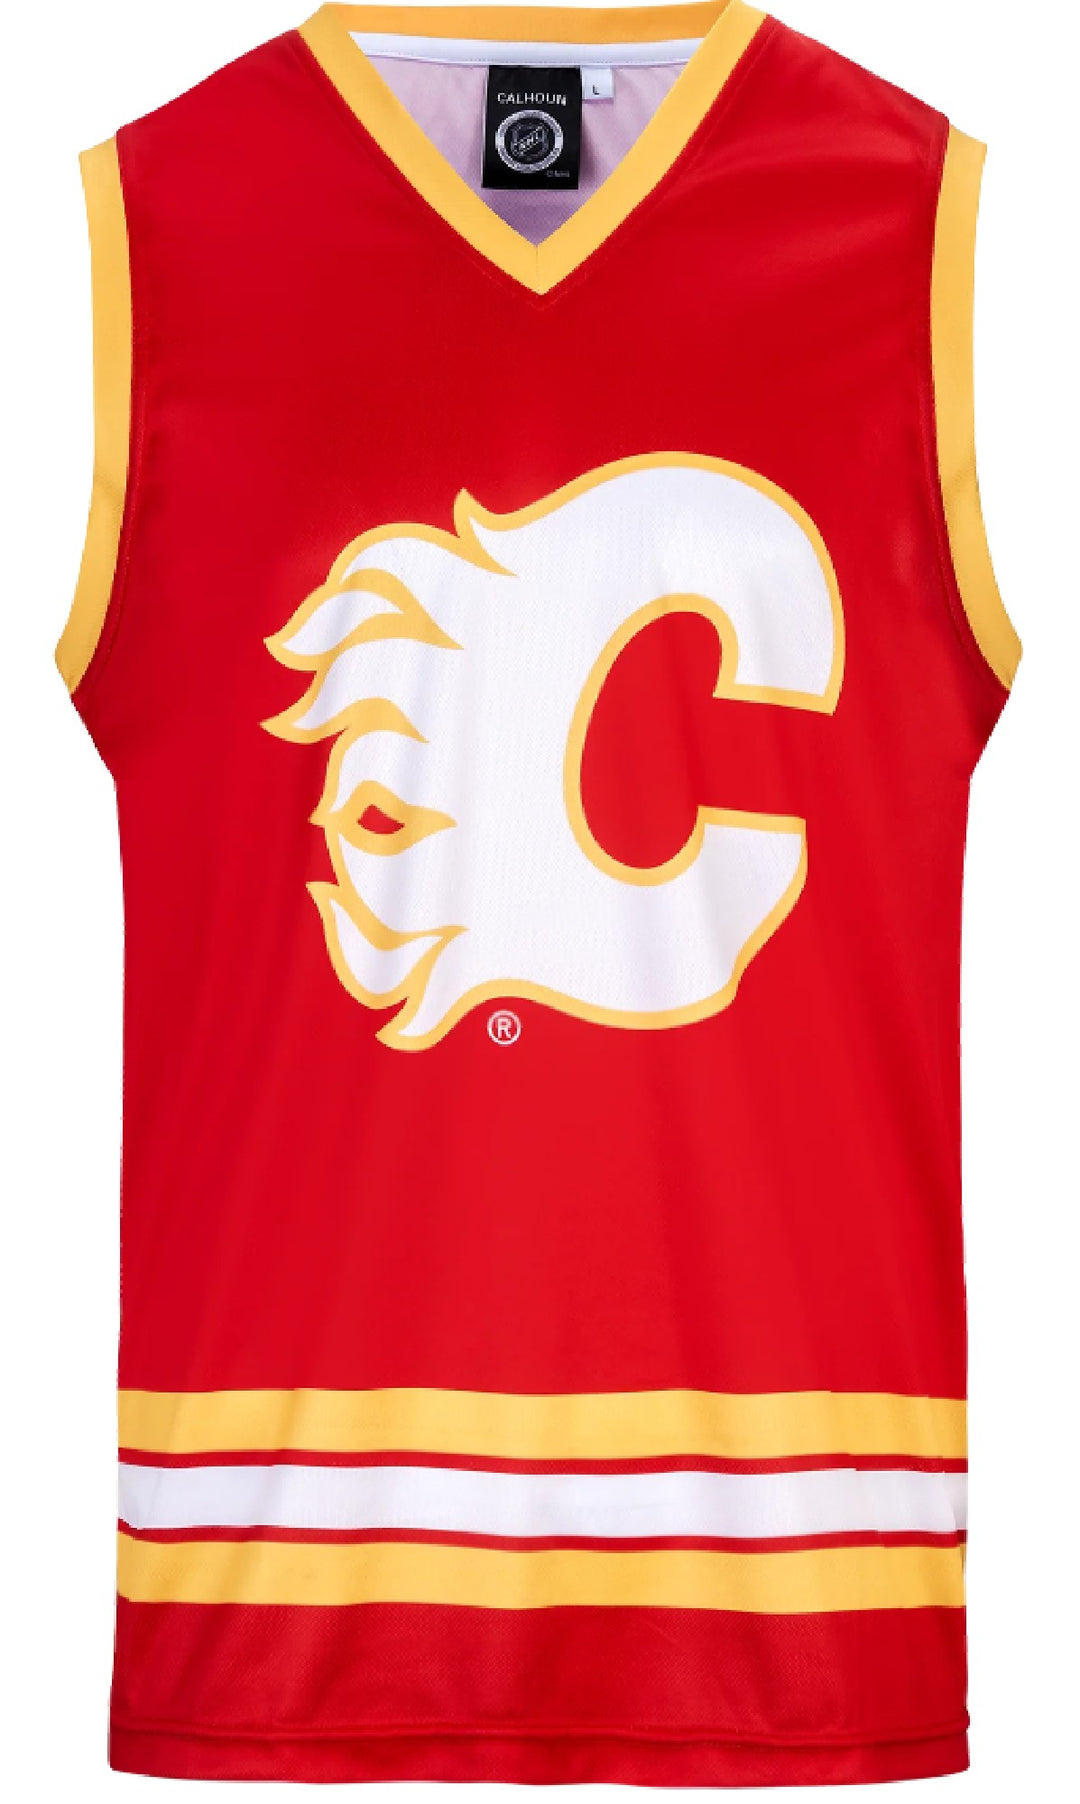 Flames Bench Clearers Alternate Hockey Tank